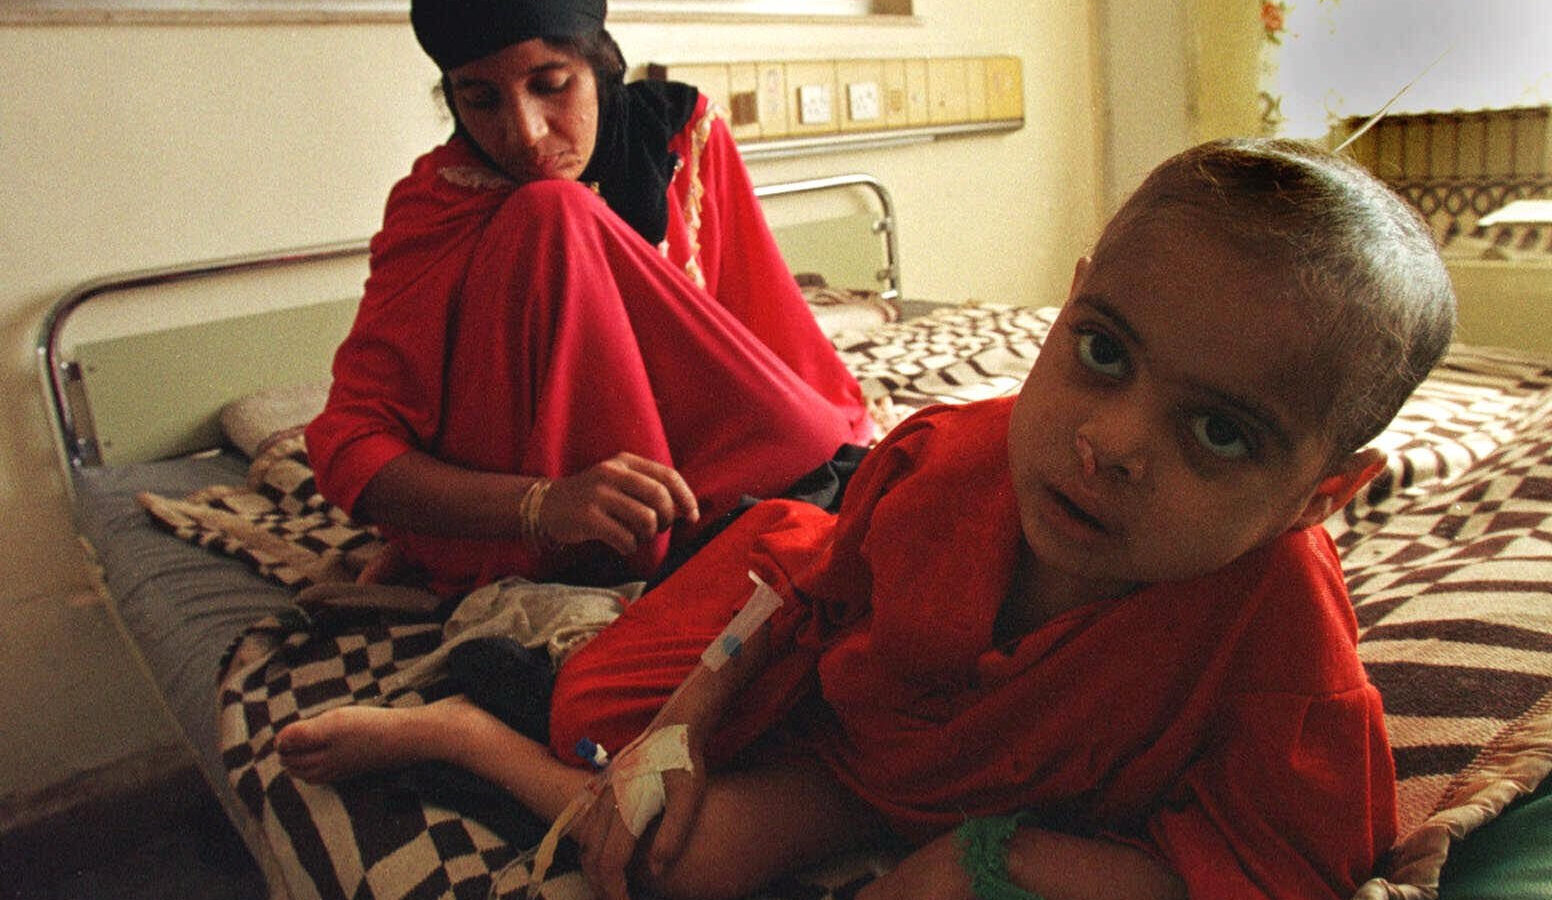 Suffering from leukemia, 5 year-old Sahira lies in her bed as her mother weeps at the Saddam Children's Hospital in Baghdad Tuesday, Jan. 12, 1999. (AP/Murad Sezer)